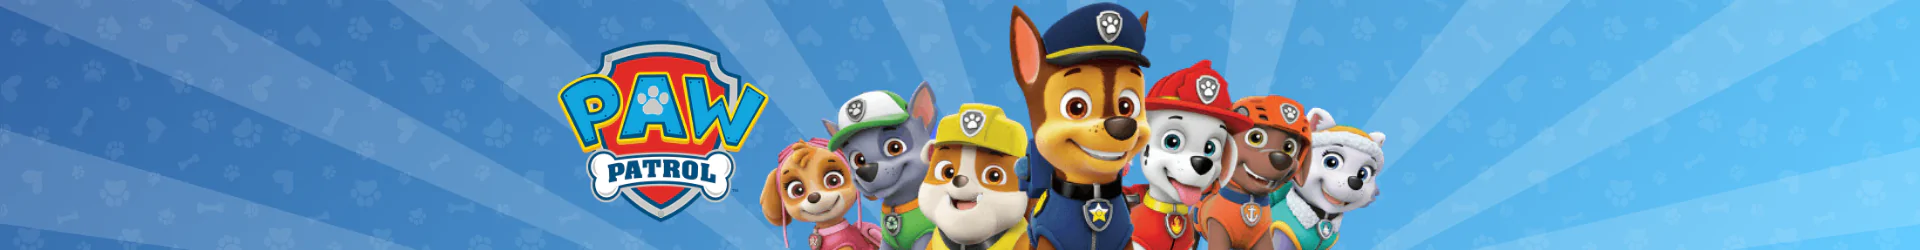 PAW Patrol puzzles banner